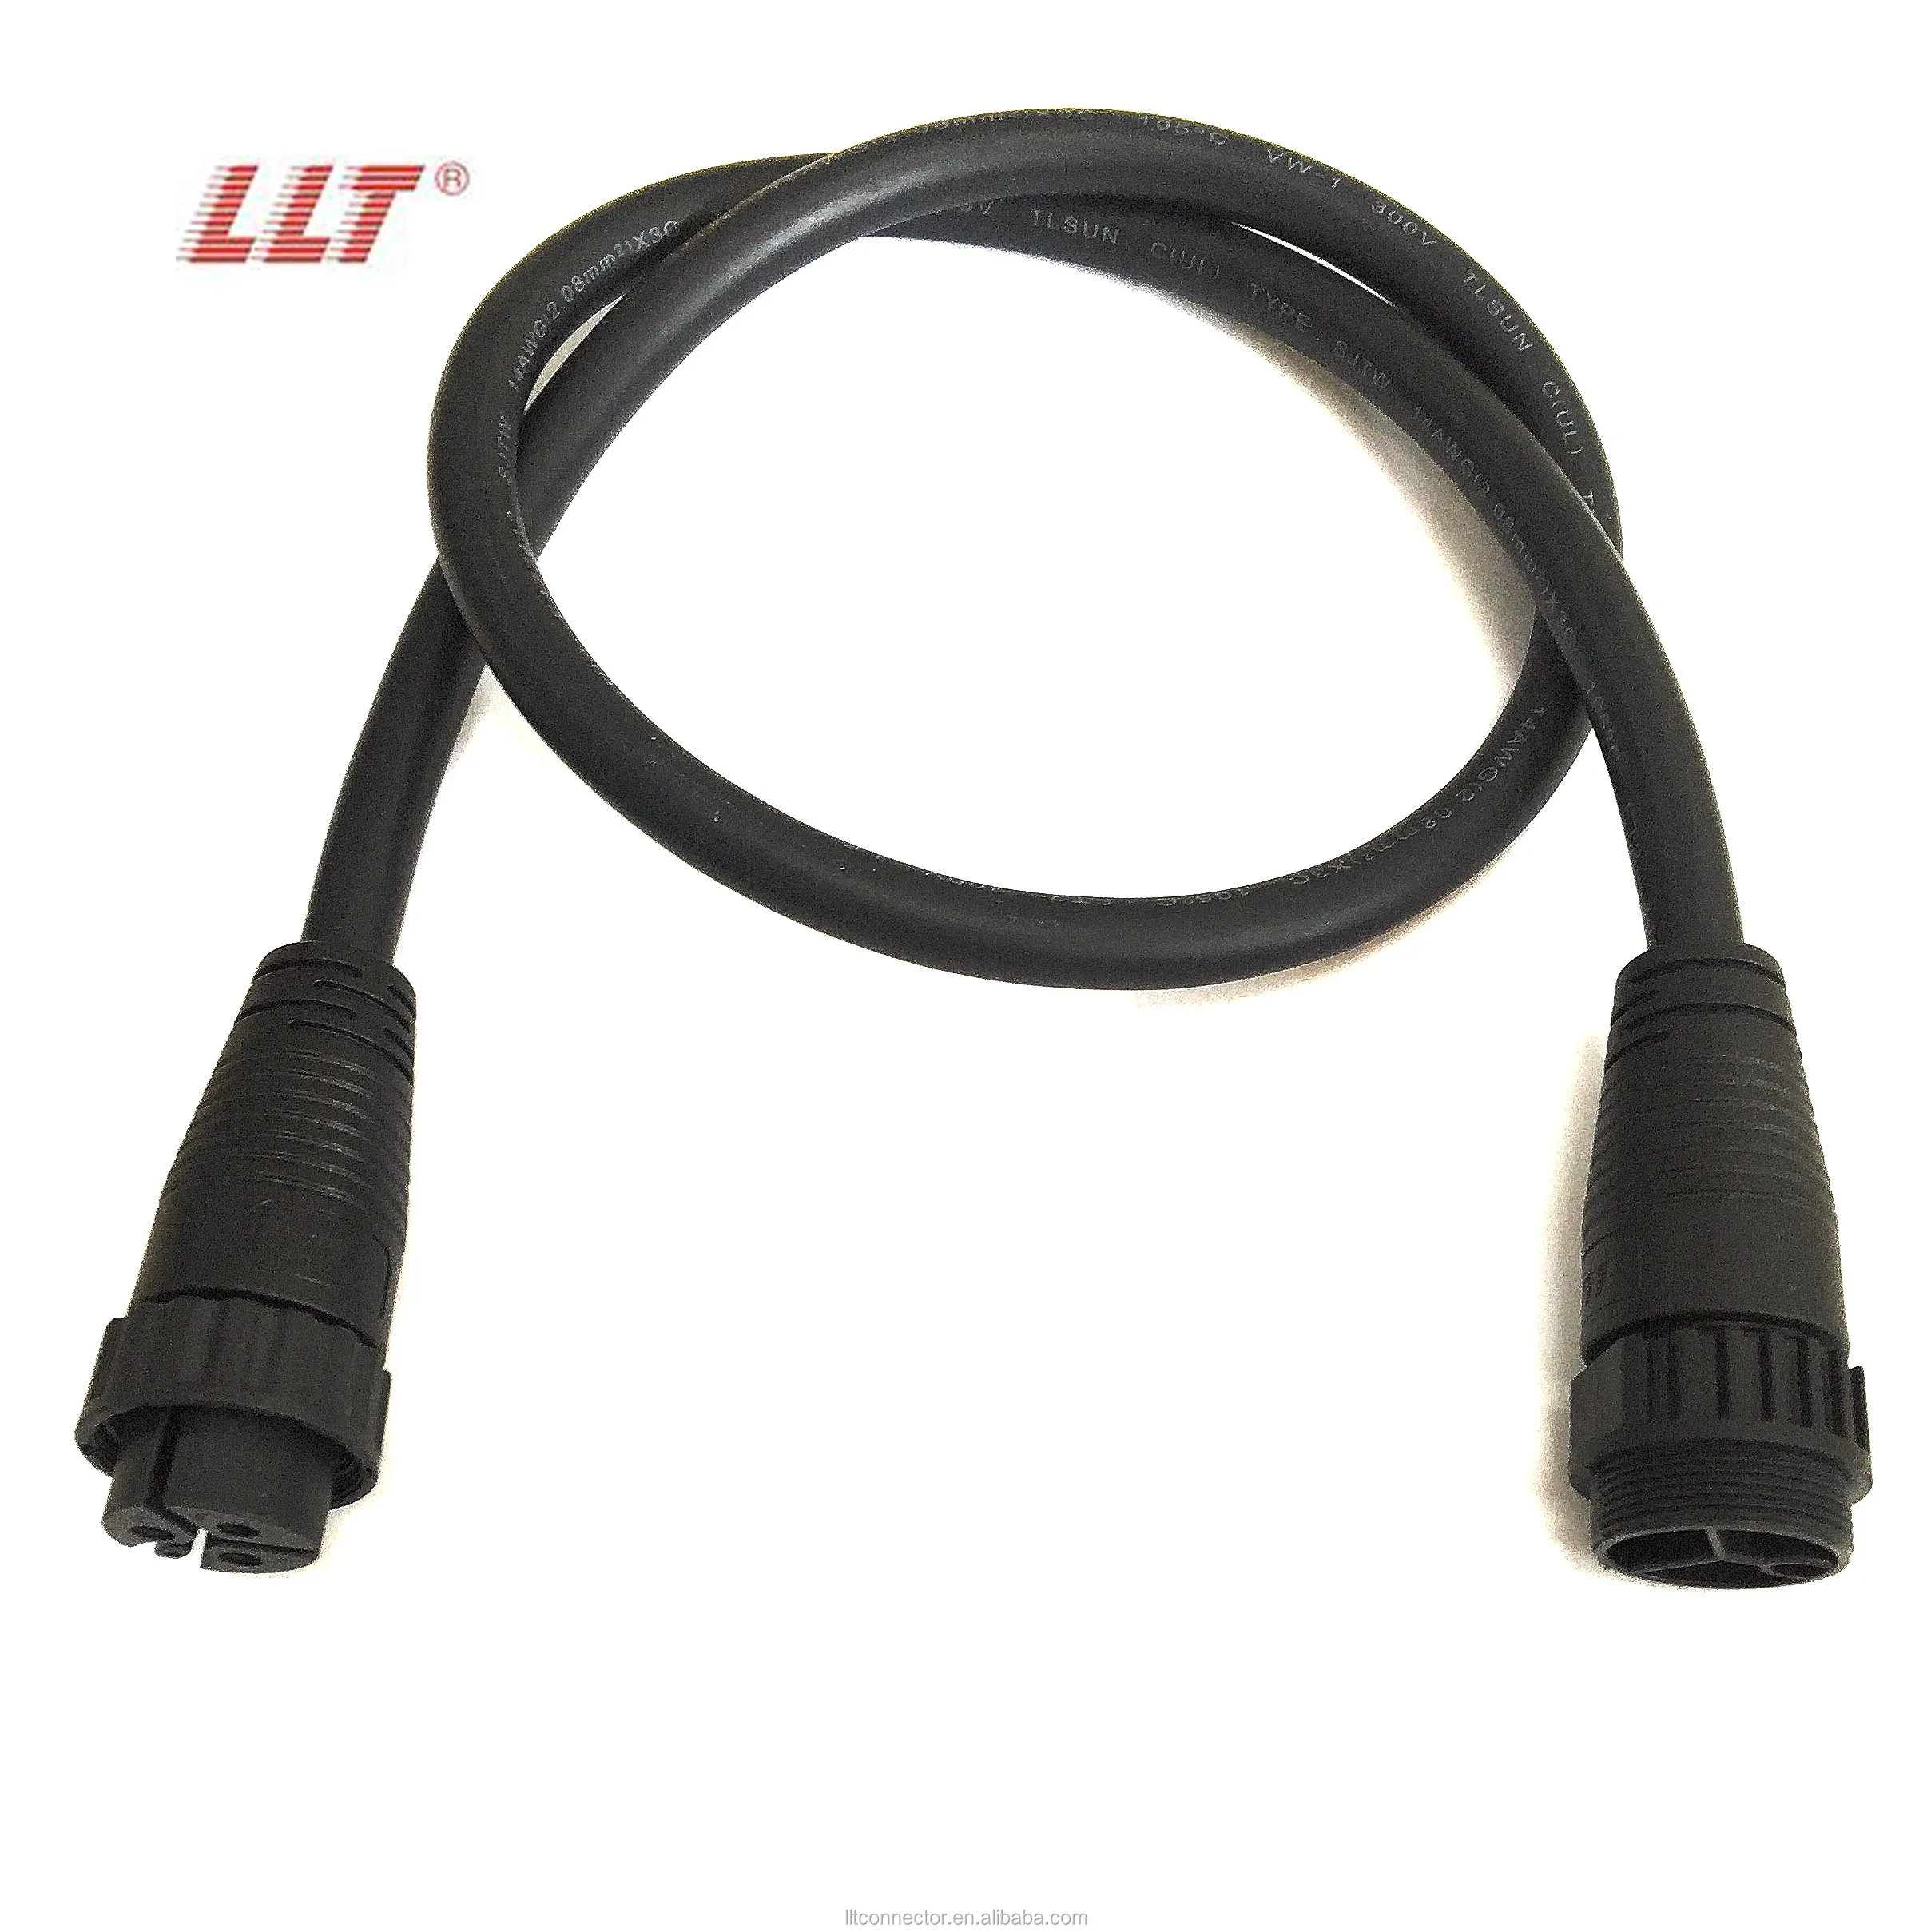 2 way straight waterproof plastic quick 2/3/4 pin cable connector for led strip light M22